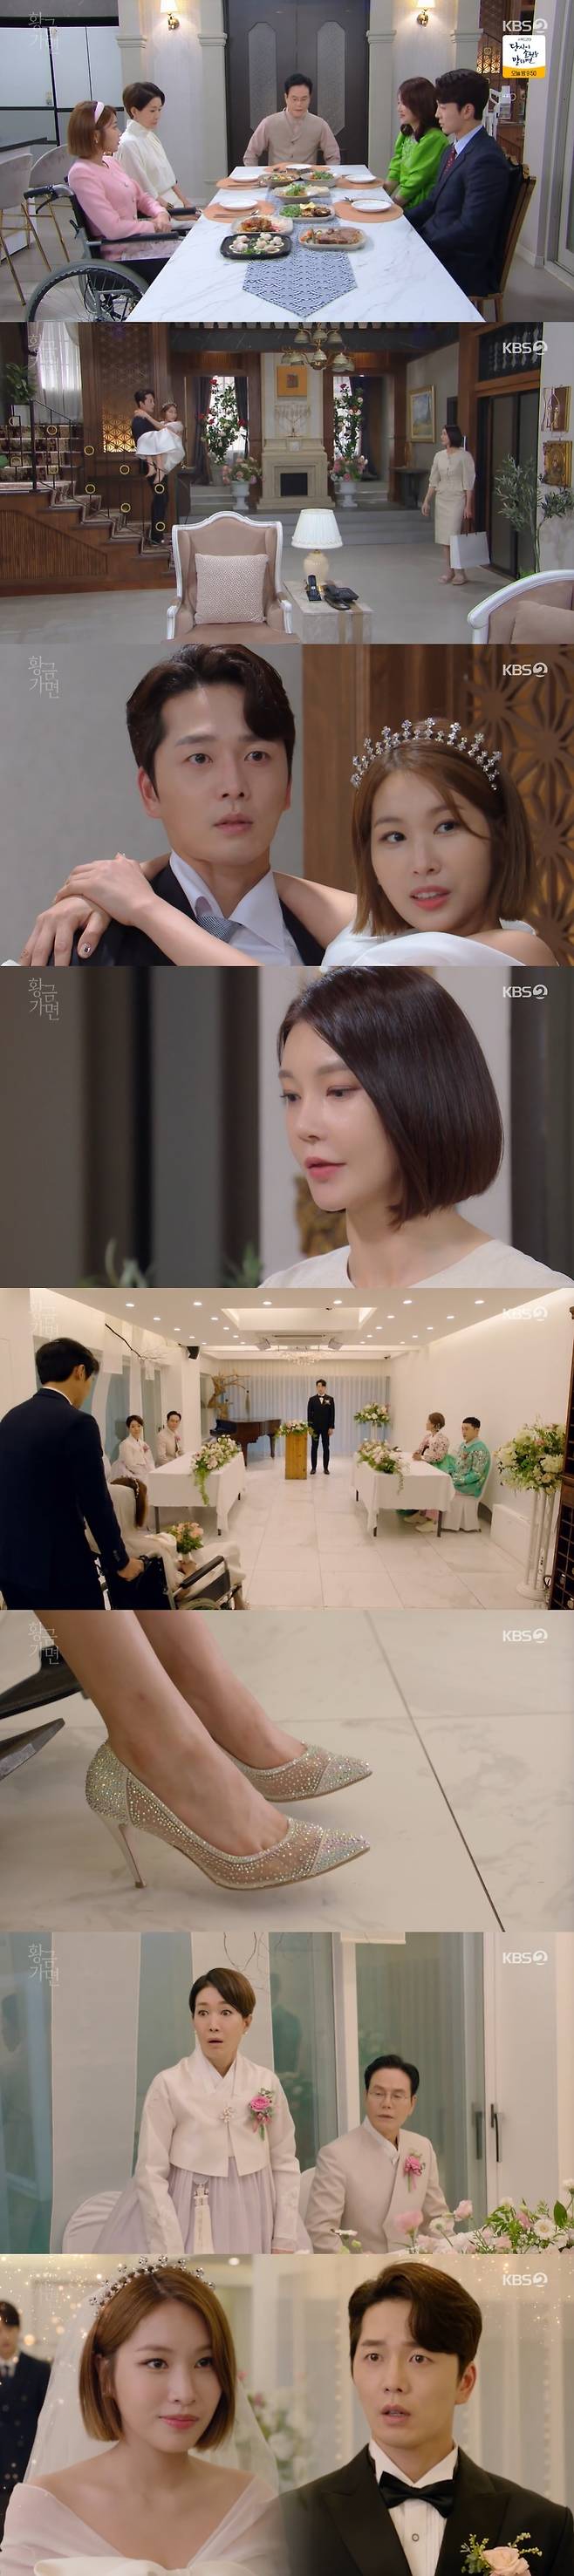 Seoul = = Golden Mask Cha Ye-ryun was shocked by Lee Hyun-jins marriage news.In the KBS 2TV daily drama Golden Mask, which was broadcast on the afternoon of the 31st, Yoo Soo-yeon (Cha Ye-ryun) later came across the fact that Lee Hyun-jin marriages Hong Jin-ah (Kong Dai-im) after breaking up with him.Hong Jin-ahs person with a disability, who had seriously injured his leg earlier, was found to be fake and added shock.On this day, Yoo Soo-yeon visited The (Lee Hwi-hyang) and informed him that he had separated from Gang Dong-ha.Yoo Soo-yeon said, The president has come to ask me if he still wants to revenge like me.Lets go together until the end of our lives, The said, saying he was still full of vengeance. He never mentioned his sons marriage.Kang Dong-ha, who promised Hong Jin-a and marriage for Yoo Soo-yeon, finished the meeting with a super speed.Kang Dong-ha met her mother The and Hong Jin-a family and had a meeting and dinner.Hong Jin-a said, When do we weeding ceremony, I want to do it soon. Gang Dong-ha agreed, If you allow it, I will do it quickly.But wedding ceremony should be played grandly, The complained. Nevertheless, Hong Jin-a said, I just need my brother.It is also good to live right now without Wedding ceremony. Among them, Yoo Soo-yeon made wedding shoes that were made by order, and when asked to deliver them directly, he wrote down the address: Hong Jin-ahs wedding shoes.At this time, Hong Jin-a called Gang Dong-ha at home, saying it was urgent, and ordered him to ship to Yo-Soo-yeon on purpose.Yoo Soo-yeon, who visited his former in-laws, was shocked to learn about the marriage of Kang Dong-ha and Hong Jin-a.Yoo Soo-yeon tried to ignore it, but Hong Jin-a asked Kang Dong-ha, How about? Im pretty? Hong Jin-a said, I marriage my brother and my brother.But I was a sister-in-law once, but do not congratulate me. Yoo Soo-yeon said, Congratulations and said, I will go because I delivered it. When Yoo Soo-yeon left, Gangdong was angry. What are you doing? Hong Jin-a said, What is it? I just left Guddu to the Guddu designer.He said, You still have a fuss with Yoo-yeon?Eventually, they posted a small Wedding ceremony, and attention was focused on the new bride Hong Jin-ah who appeared in a wheelchair.At this time, Hong Jin-ah said, Wait a minute. Then he suddenly stood up. He got up from his wheelchair and walked to Gangdongha and shocked everyone.